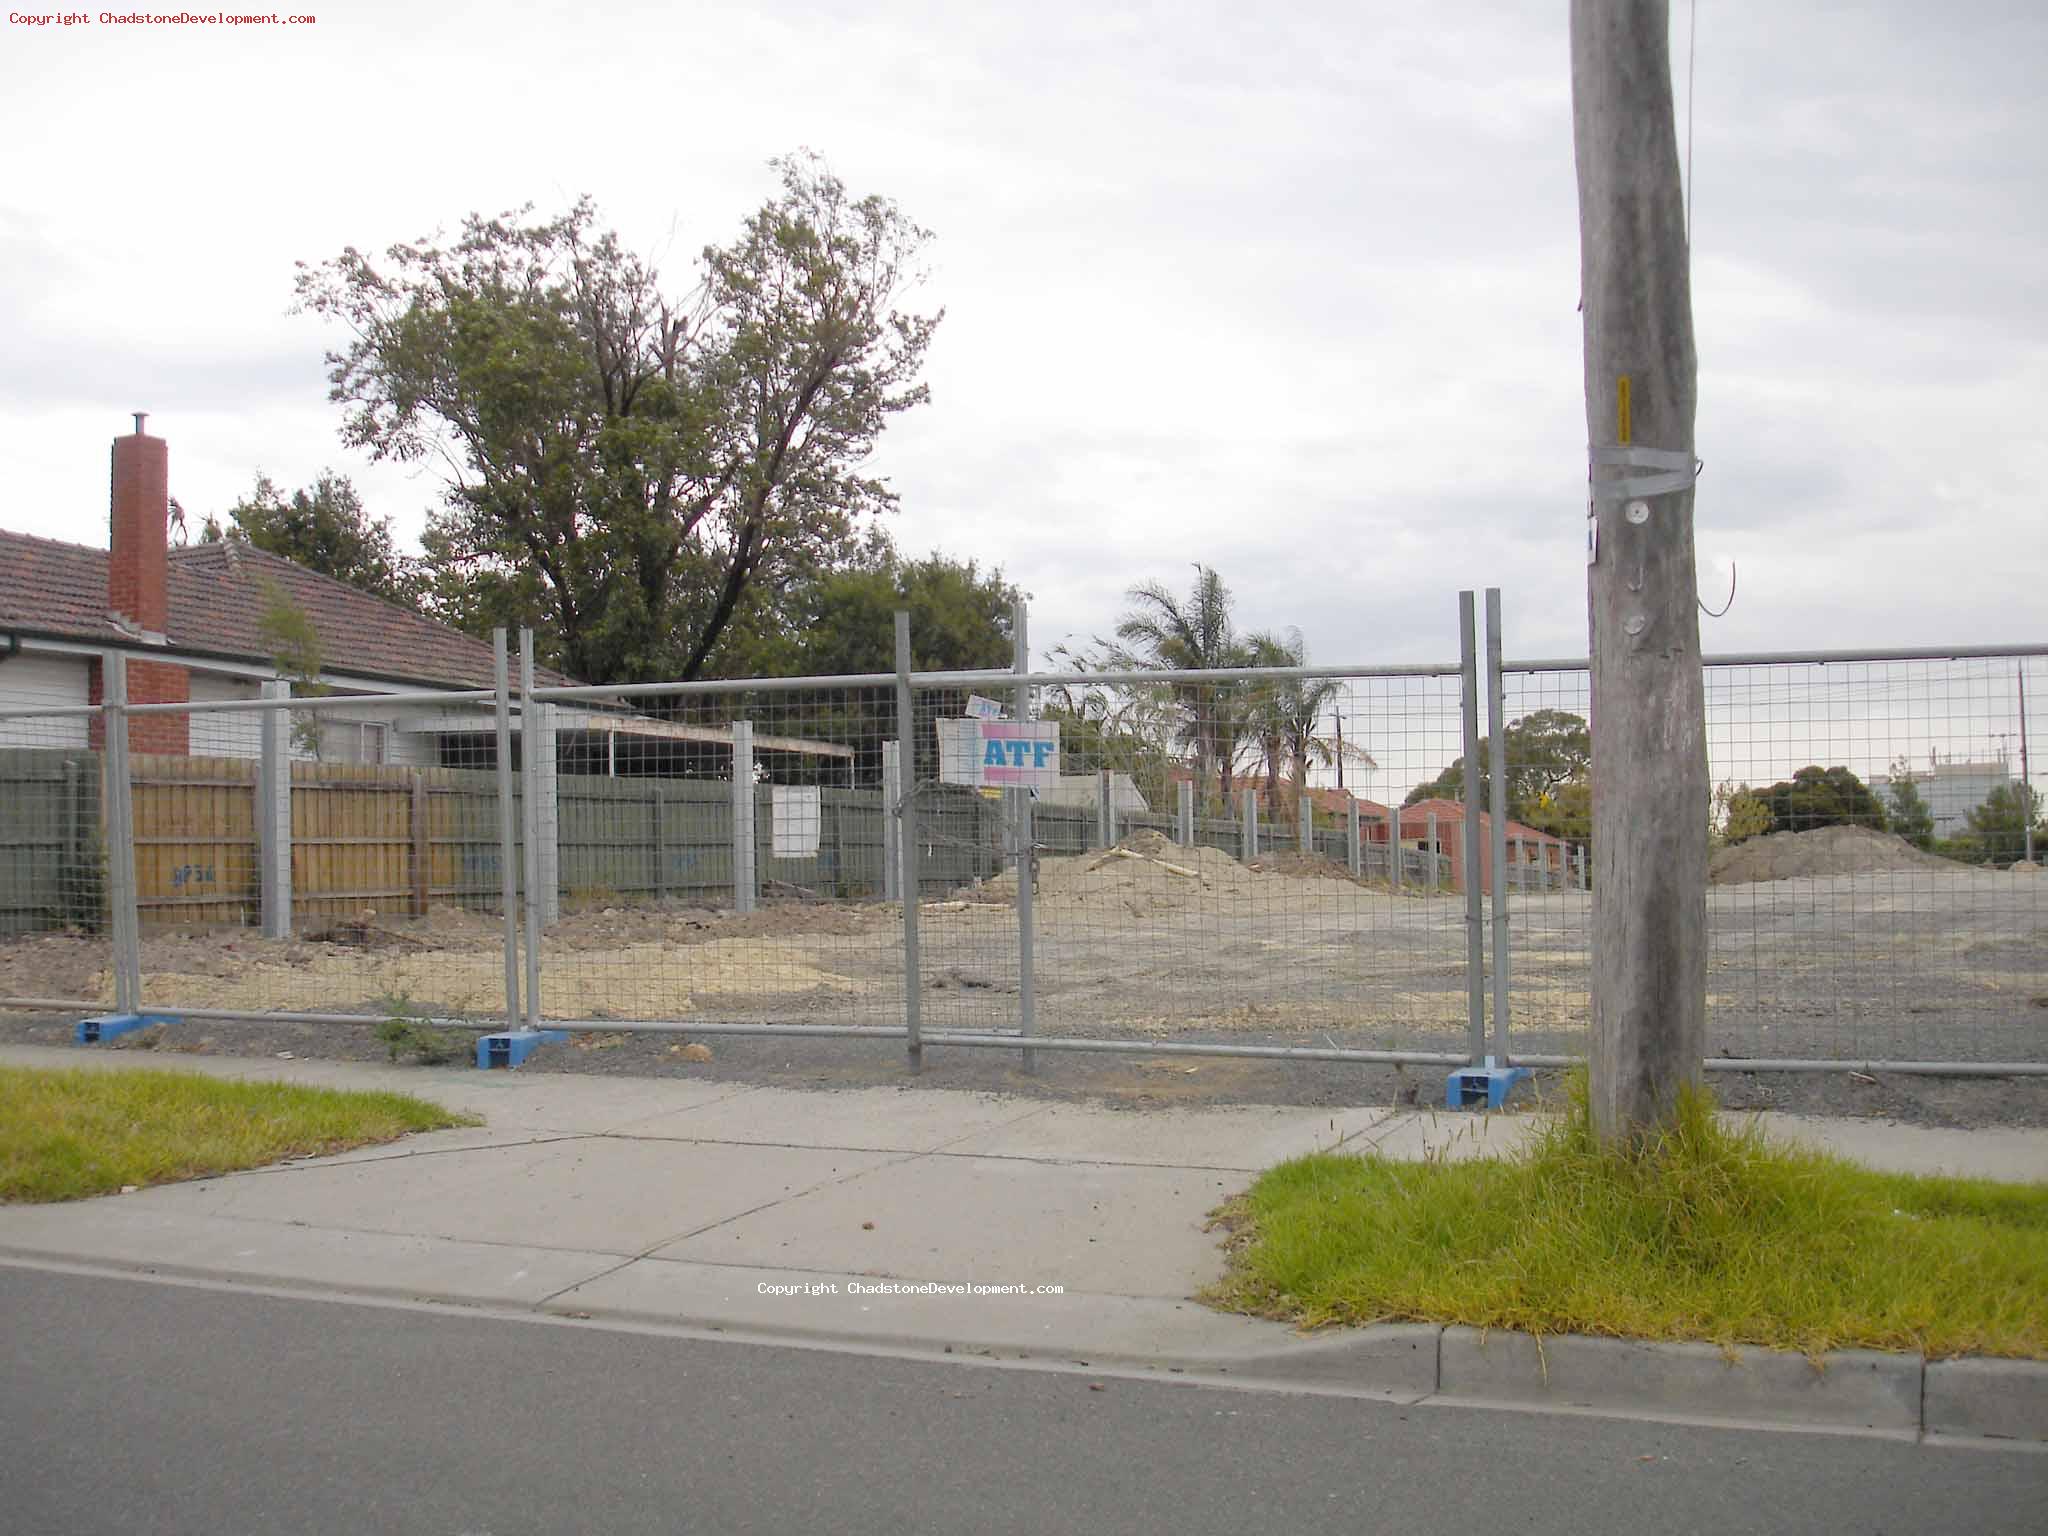 Wall posts between webster/capon - Chadstone Development Discussions